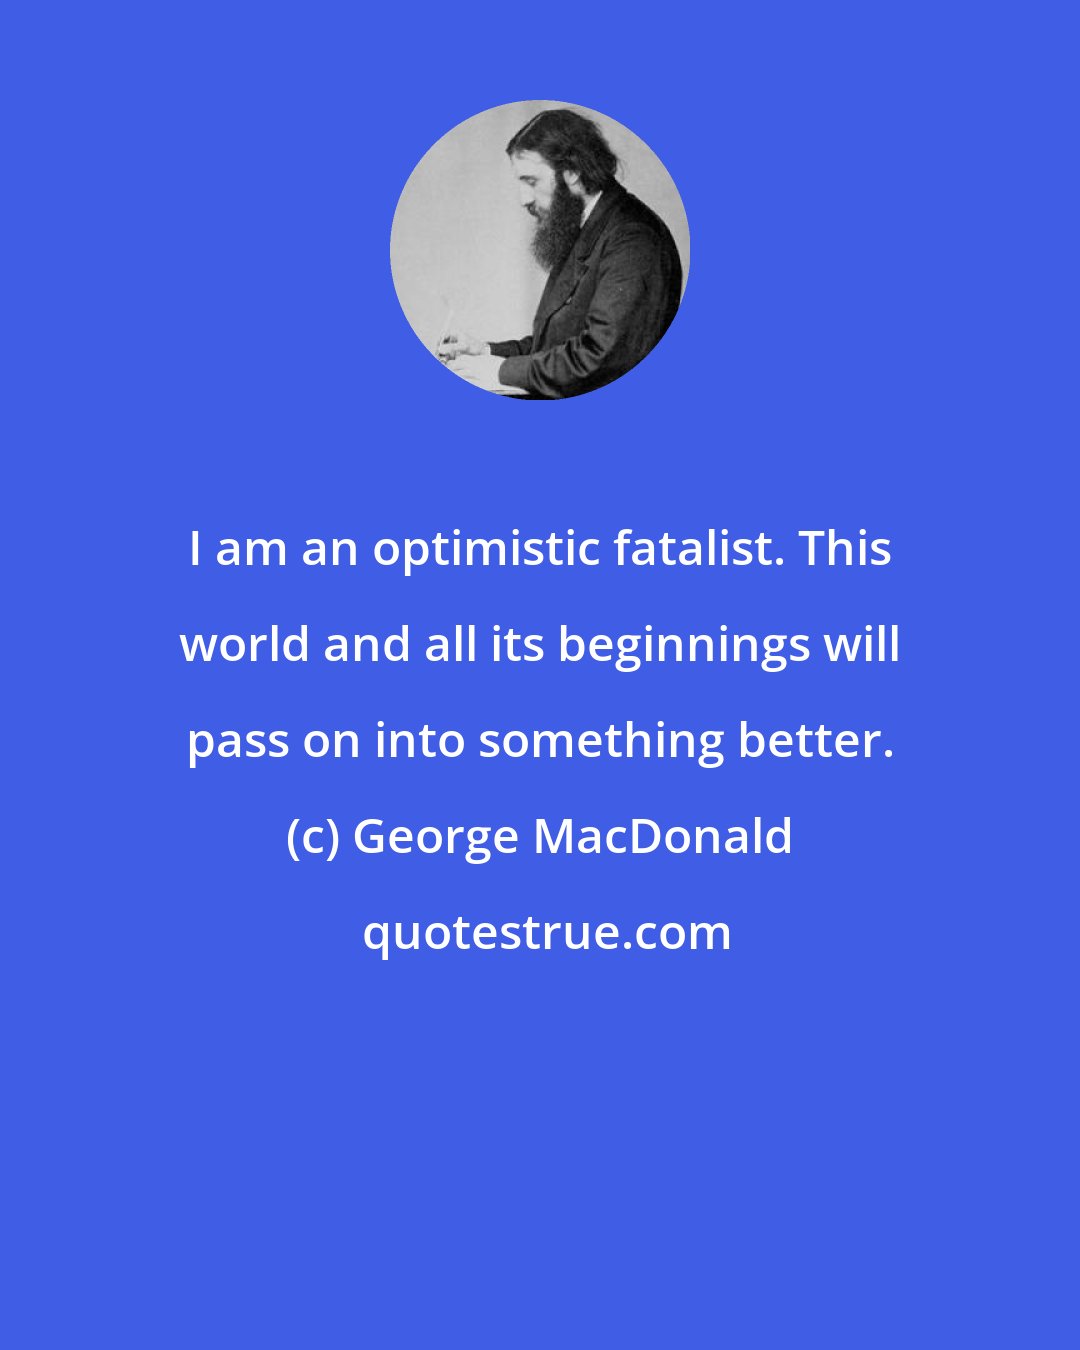 George MacDonald: I am an optimistic fatalist. This world and all its beginnings will pass on into something better.